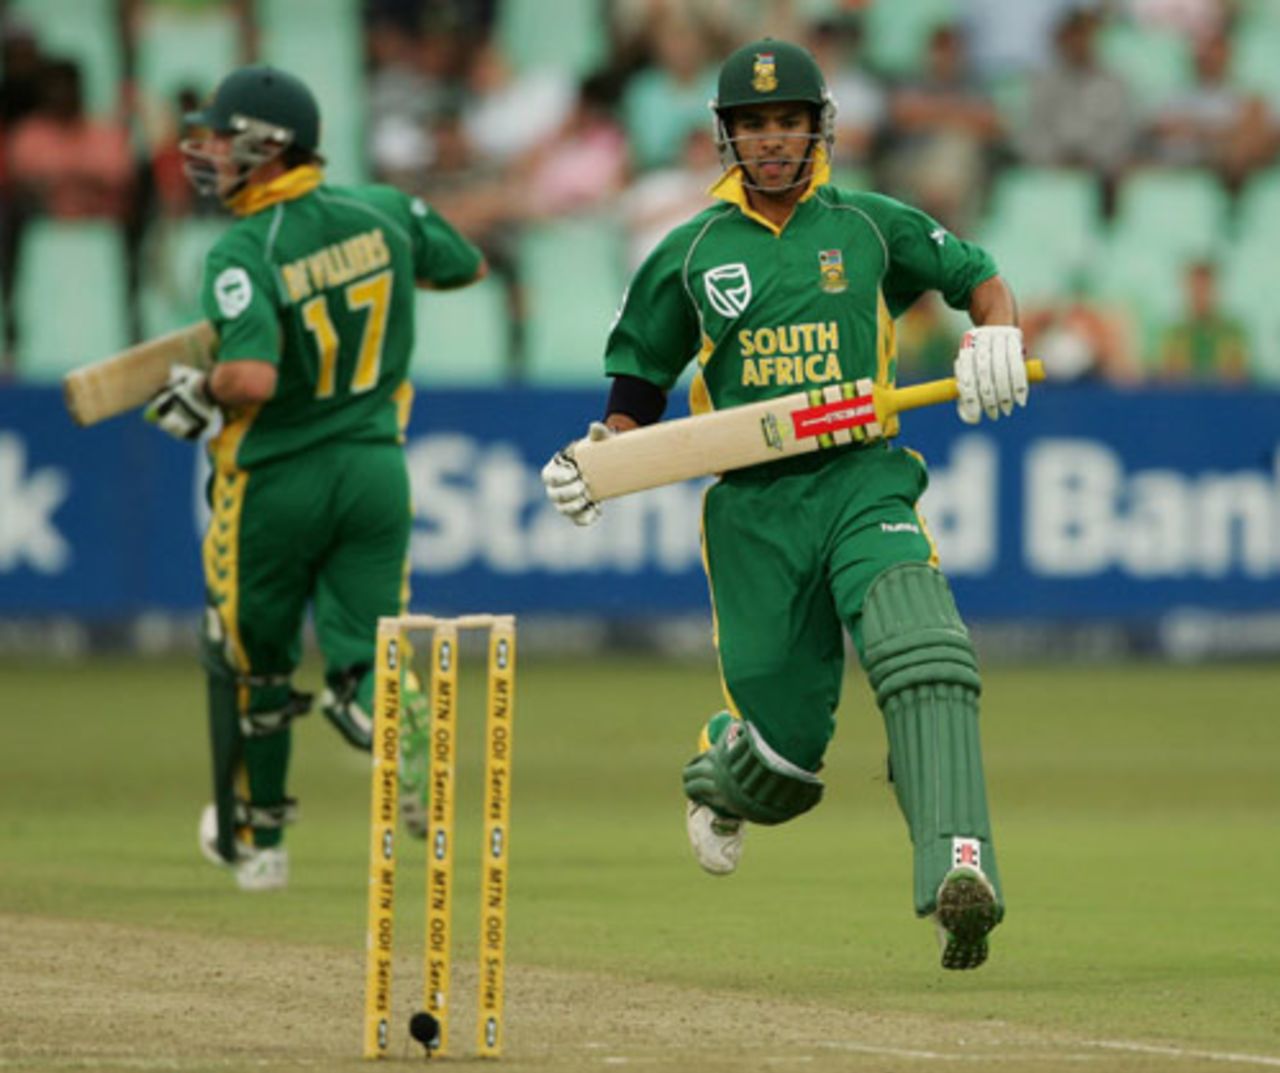 JP Duminy and AB de Villiers played crucial knocks, South Africa v New Zealand, 1st ODI, Durban, November 25, 2007